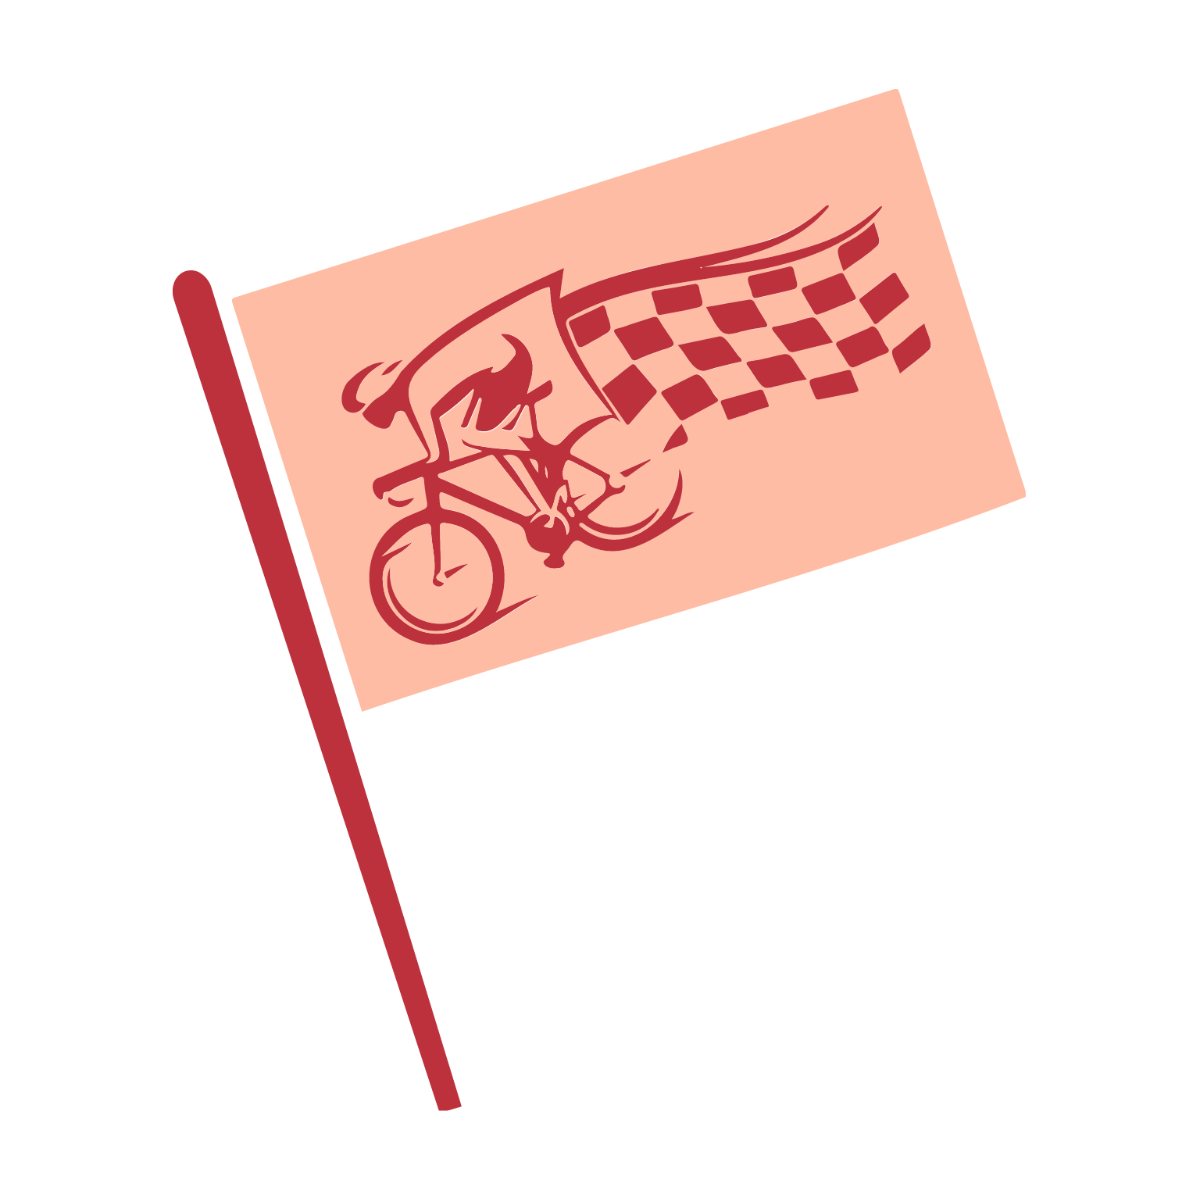 Cycling Race Flag clipart Template